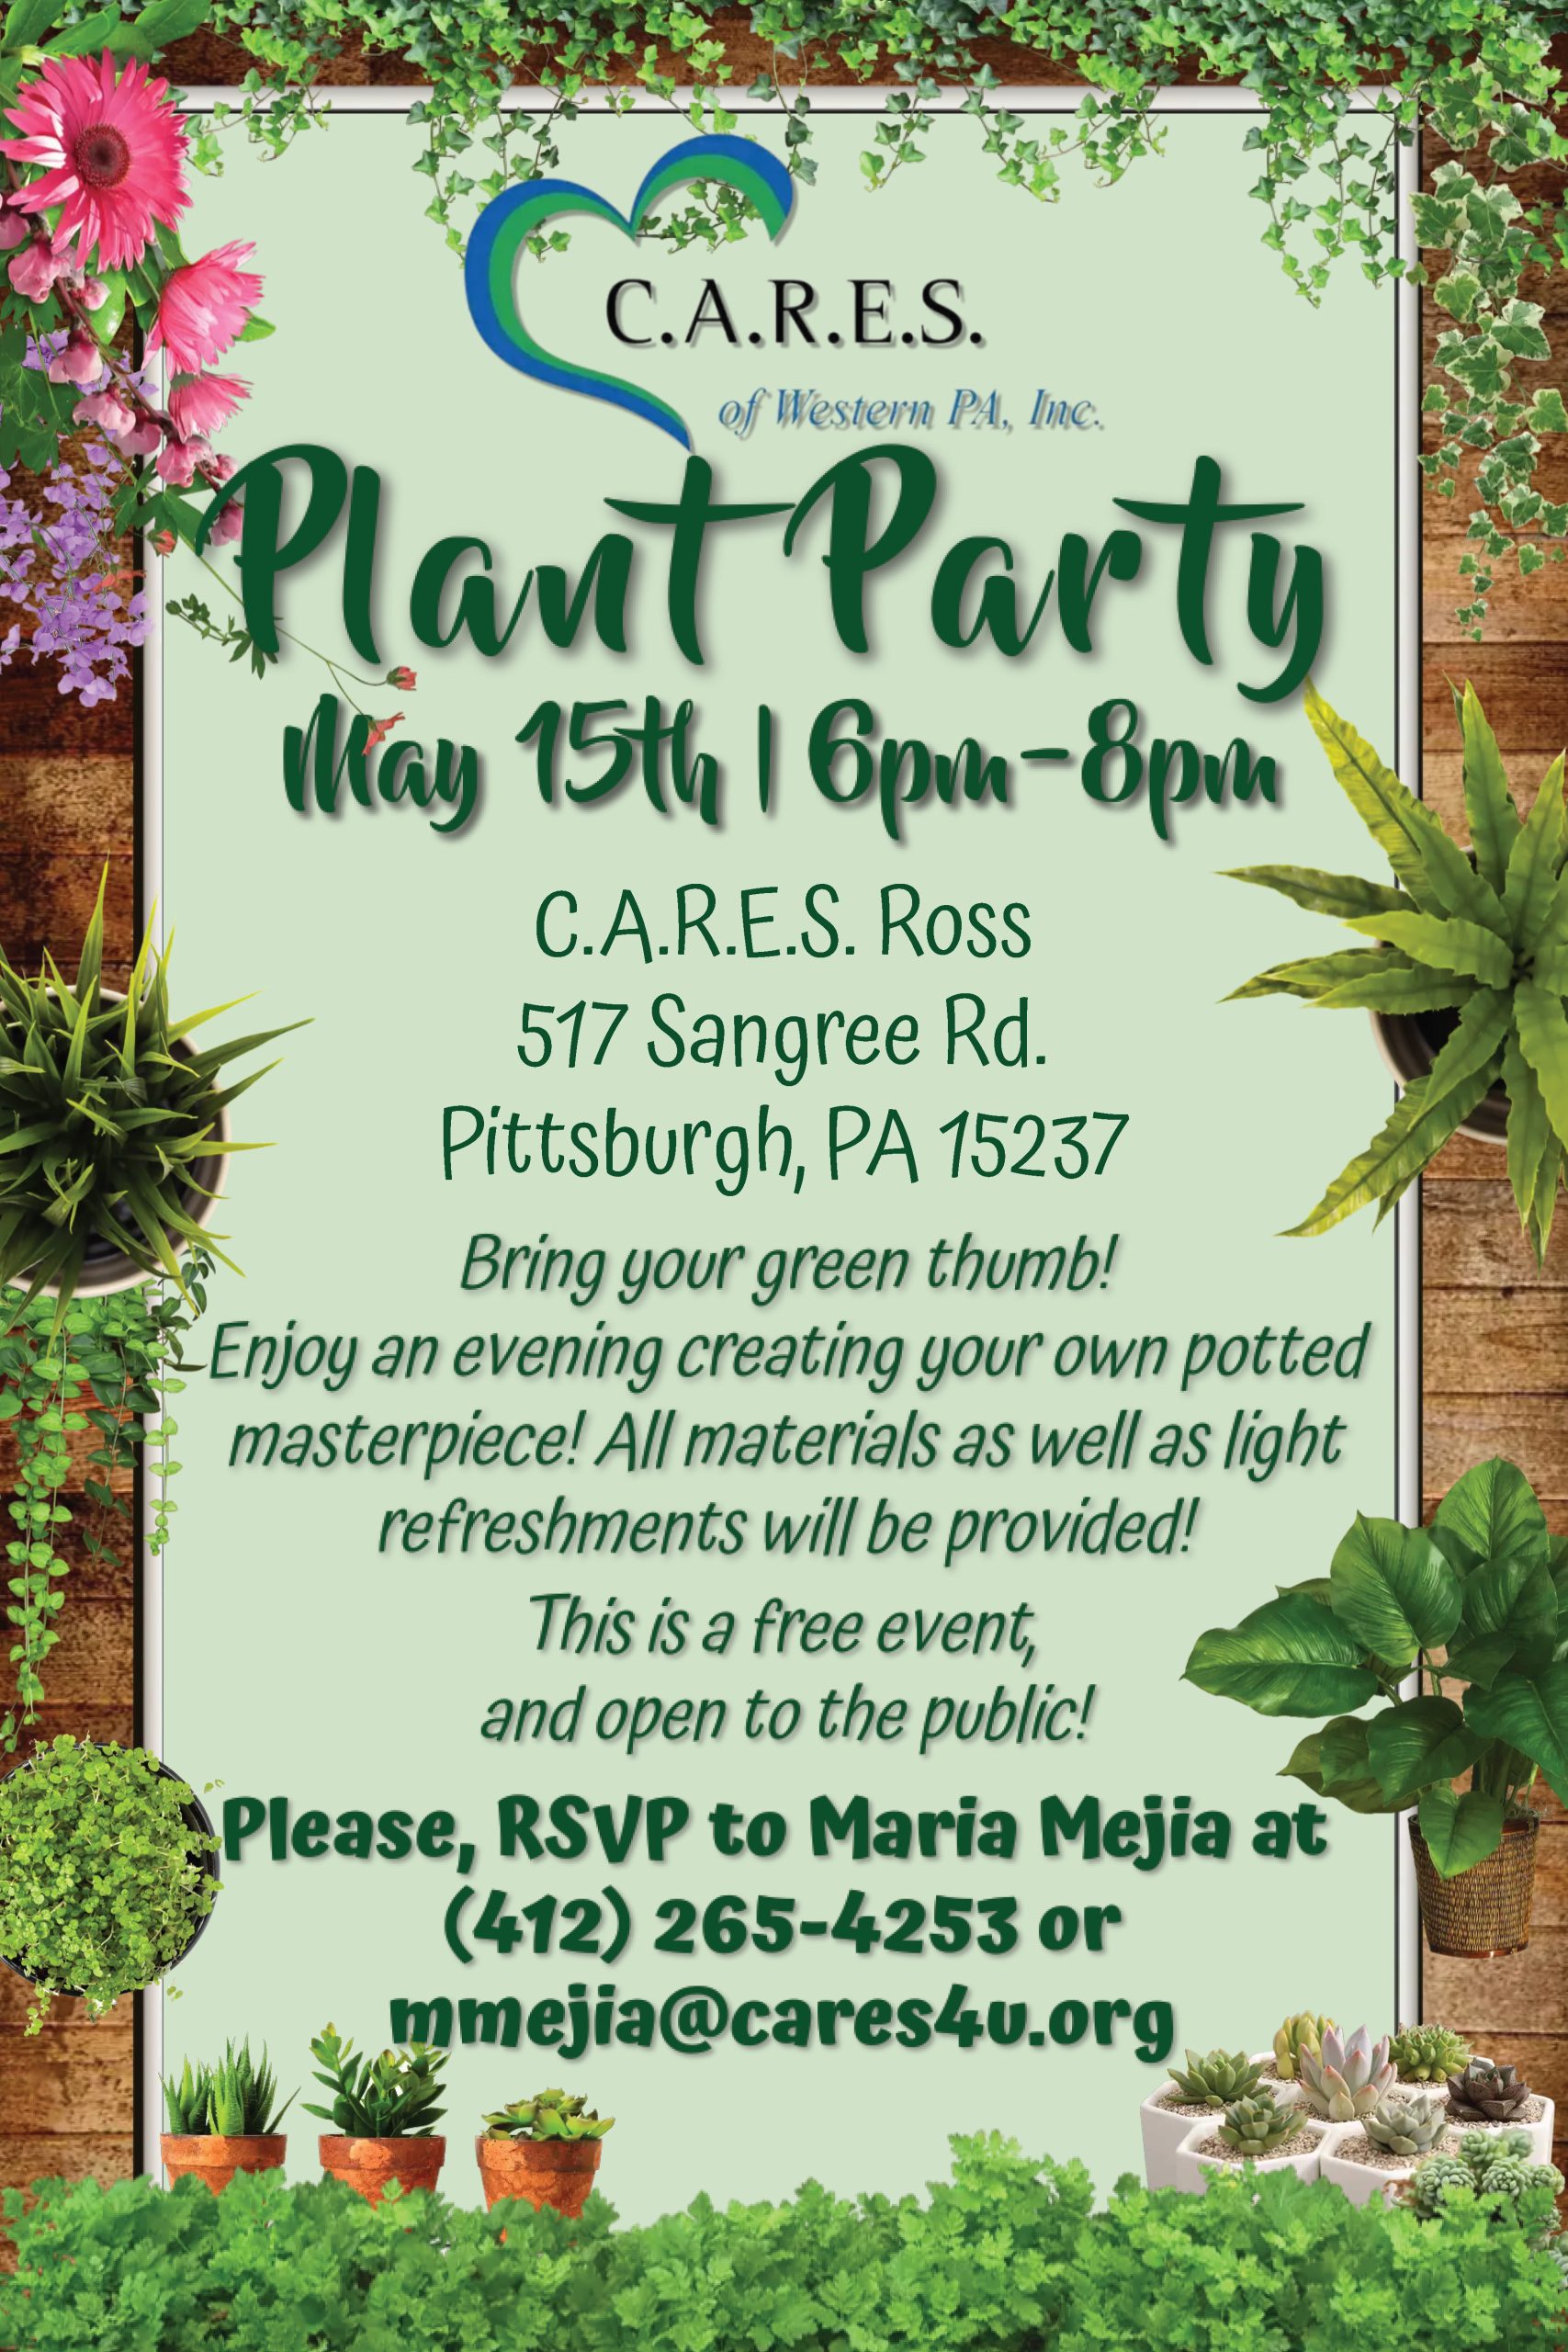 C.A.R.E.S. Plant Party - Pittsburgh 1